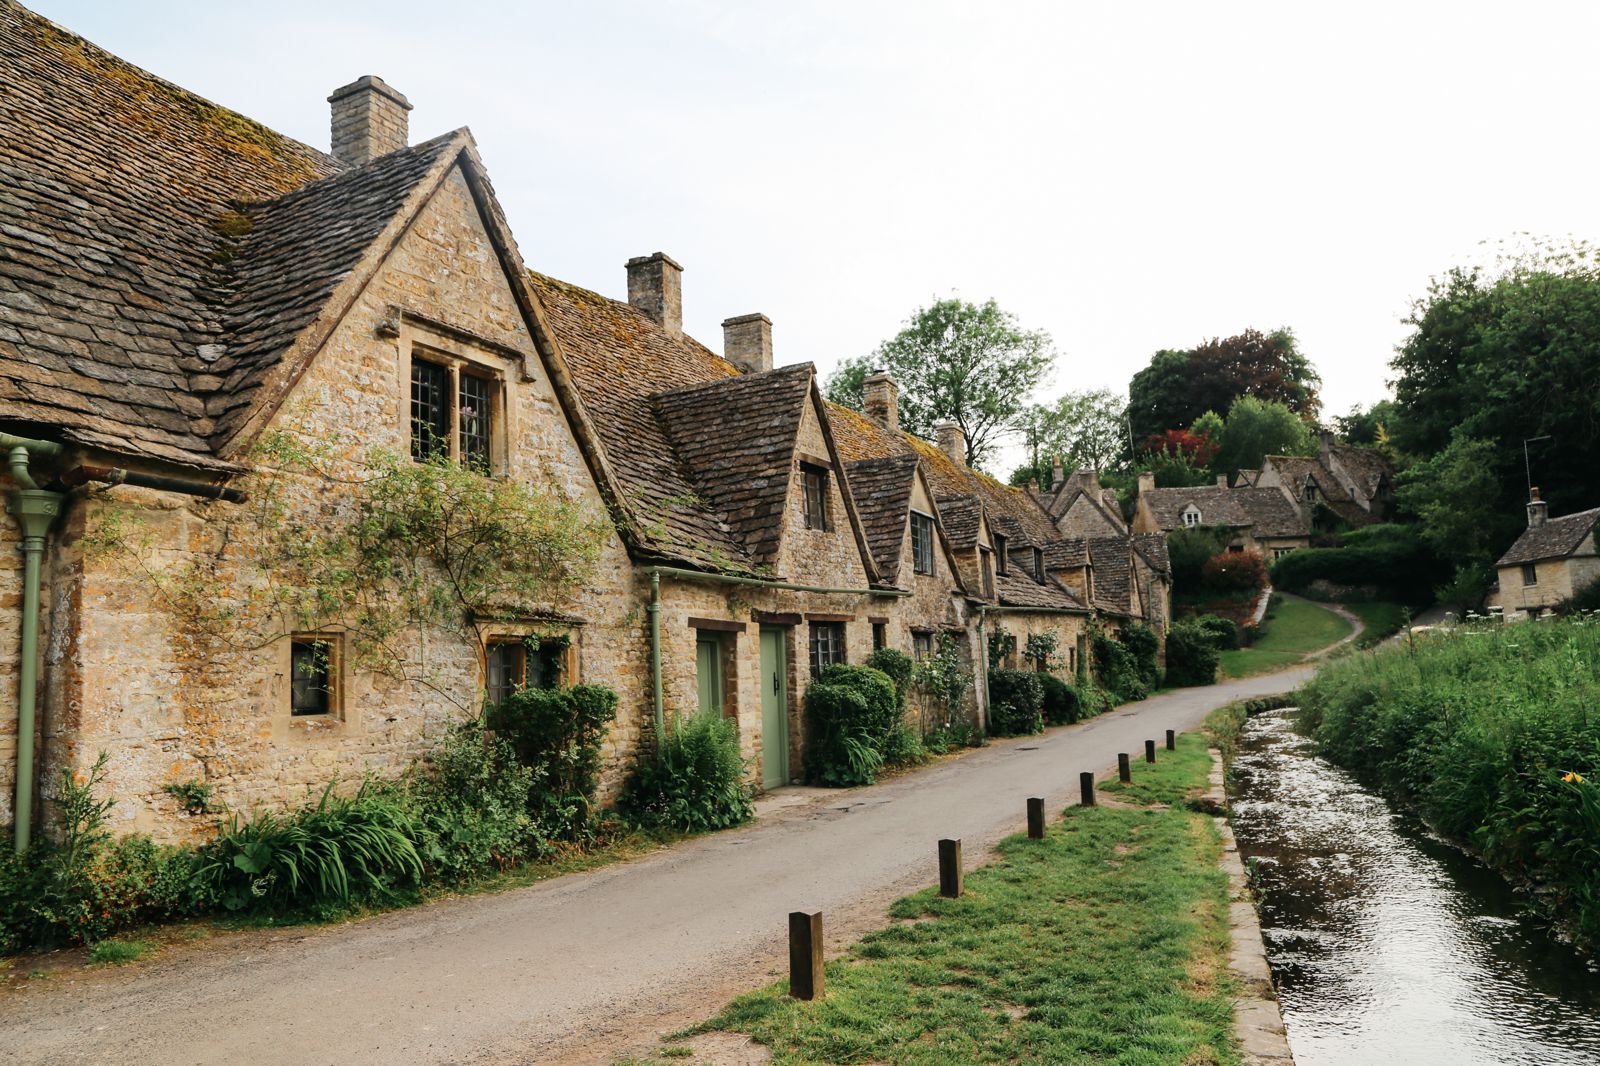 In Search Of The Most Beautiful Street In England - Arlington Row, Bibury (9)